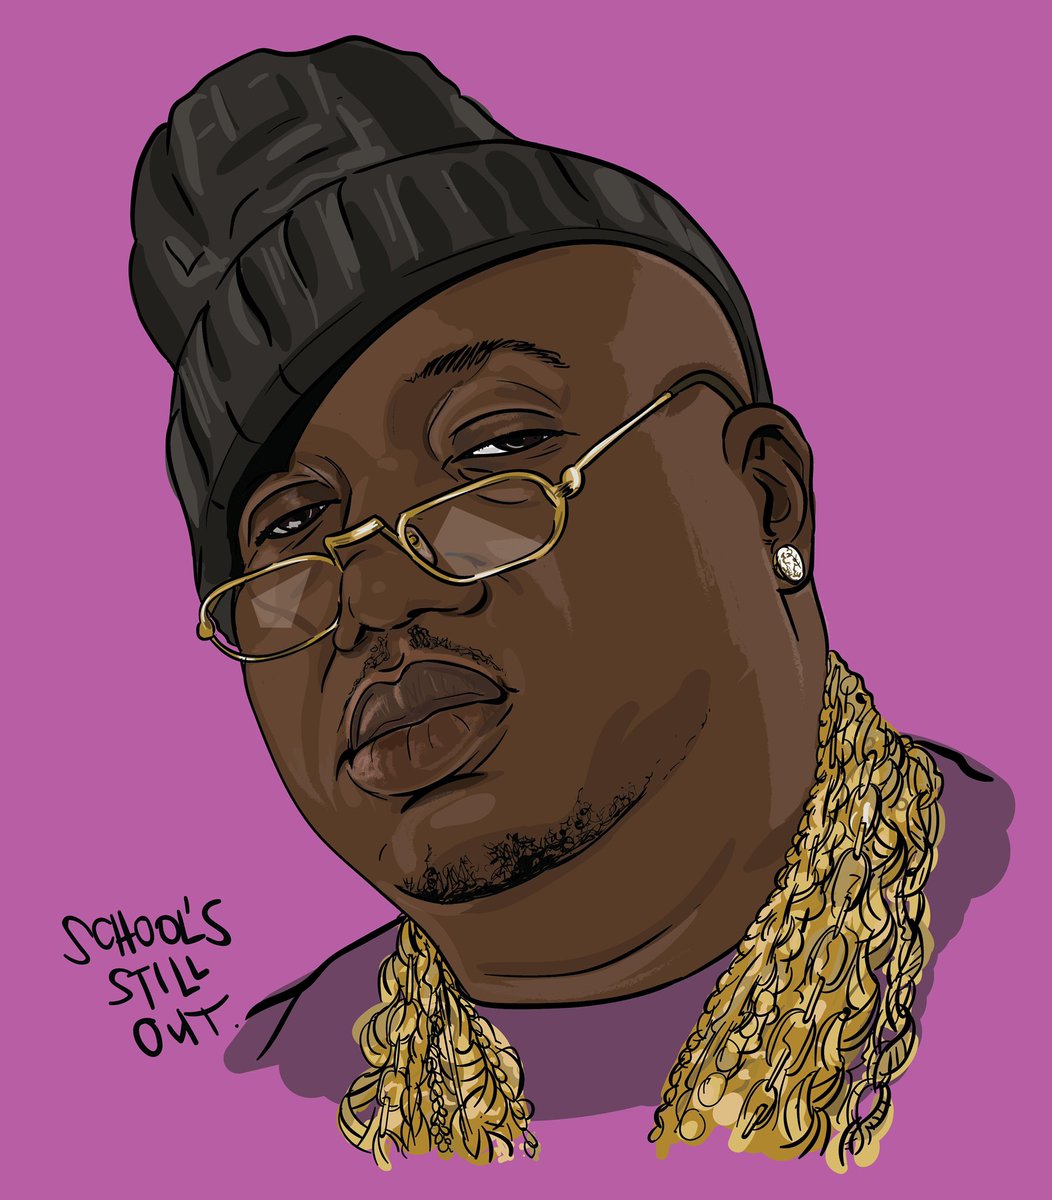 Ok, guys… Purple or pink for the @e40? Drop a comment and let me know 👇🏼 

#nft #nftart #NFTCommunity #rap #hiphop #earlstevens #bayarea #nftcollector #nfts #crypto #cryptoart $eth $ada #cnft #openseanft #schoolsstillout